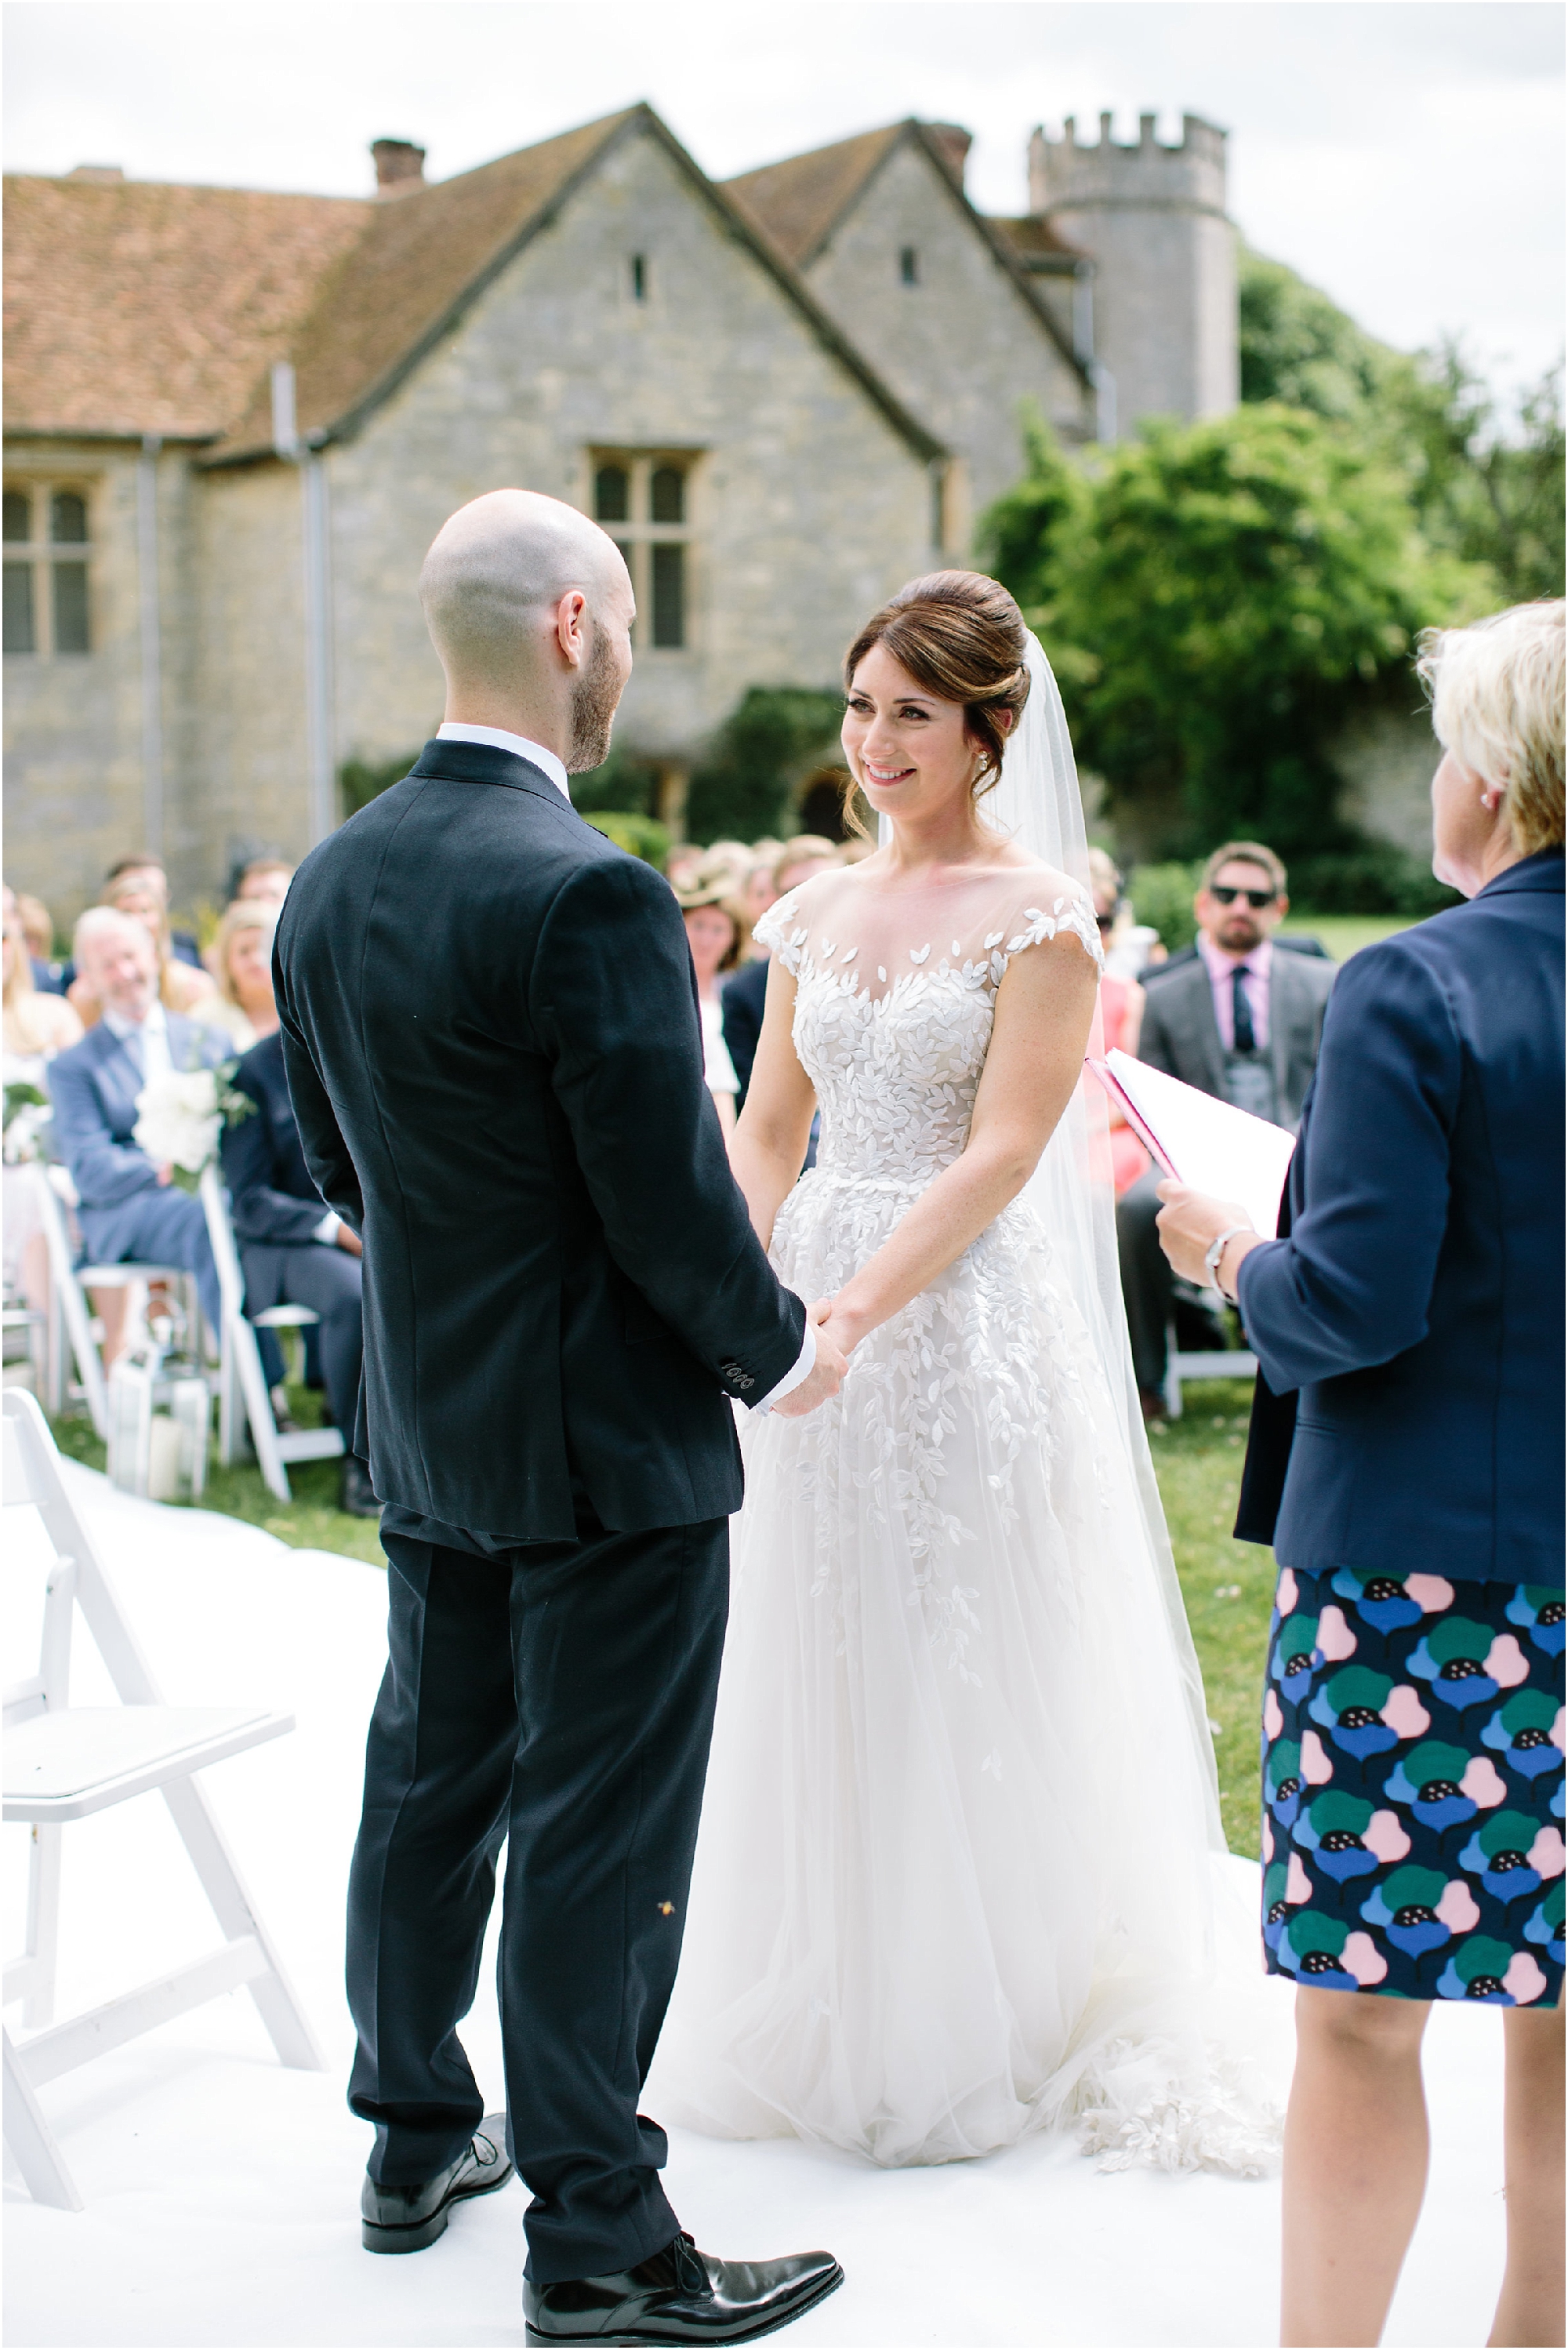 Outdoor ceremony at Notley Abbey